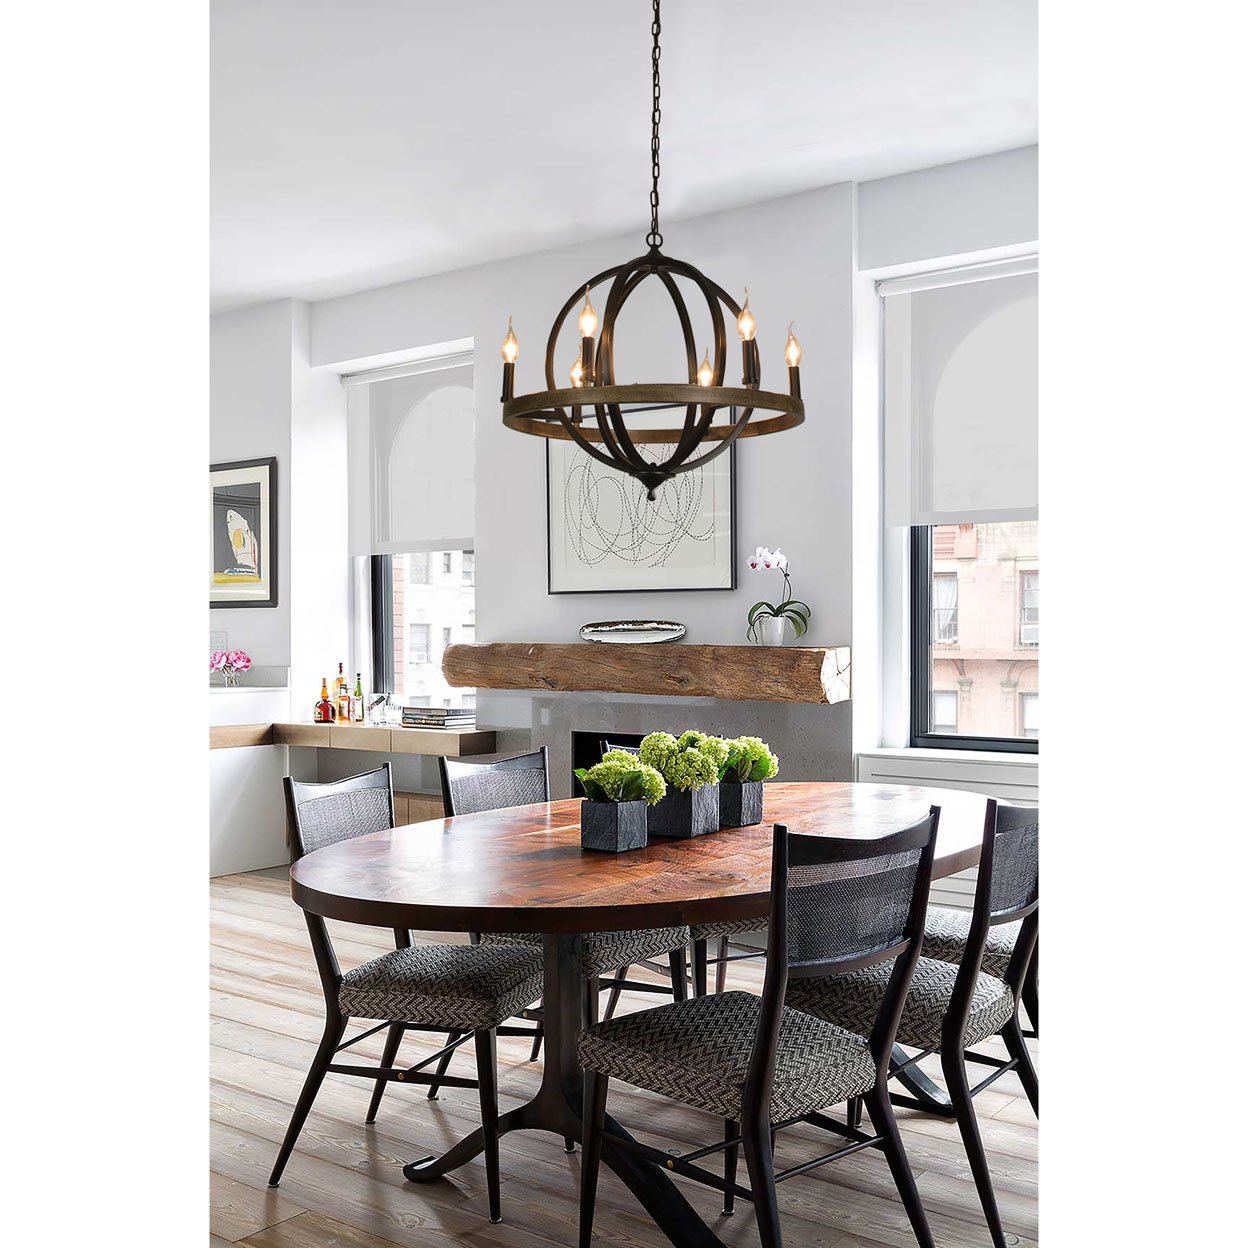 Connes 6 Light Chandelier Globe (Matte Black) Round, Steel Sphere with Wood Patterned Decorative Circle | Dining Room, Foyer, or Entryway Home Decor Chandeliers Canyon Home 